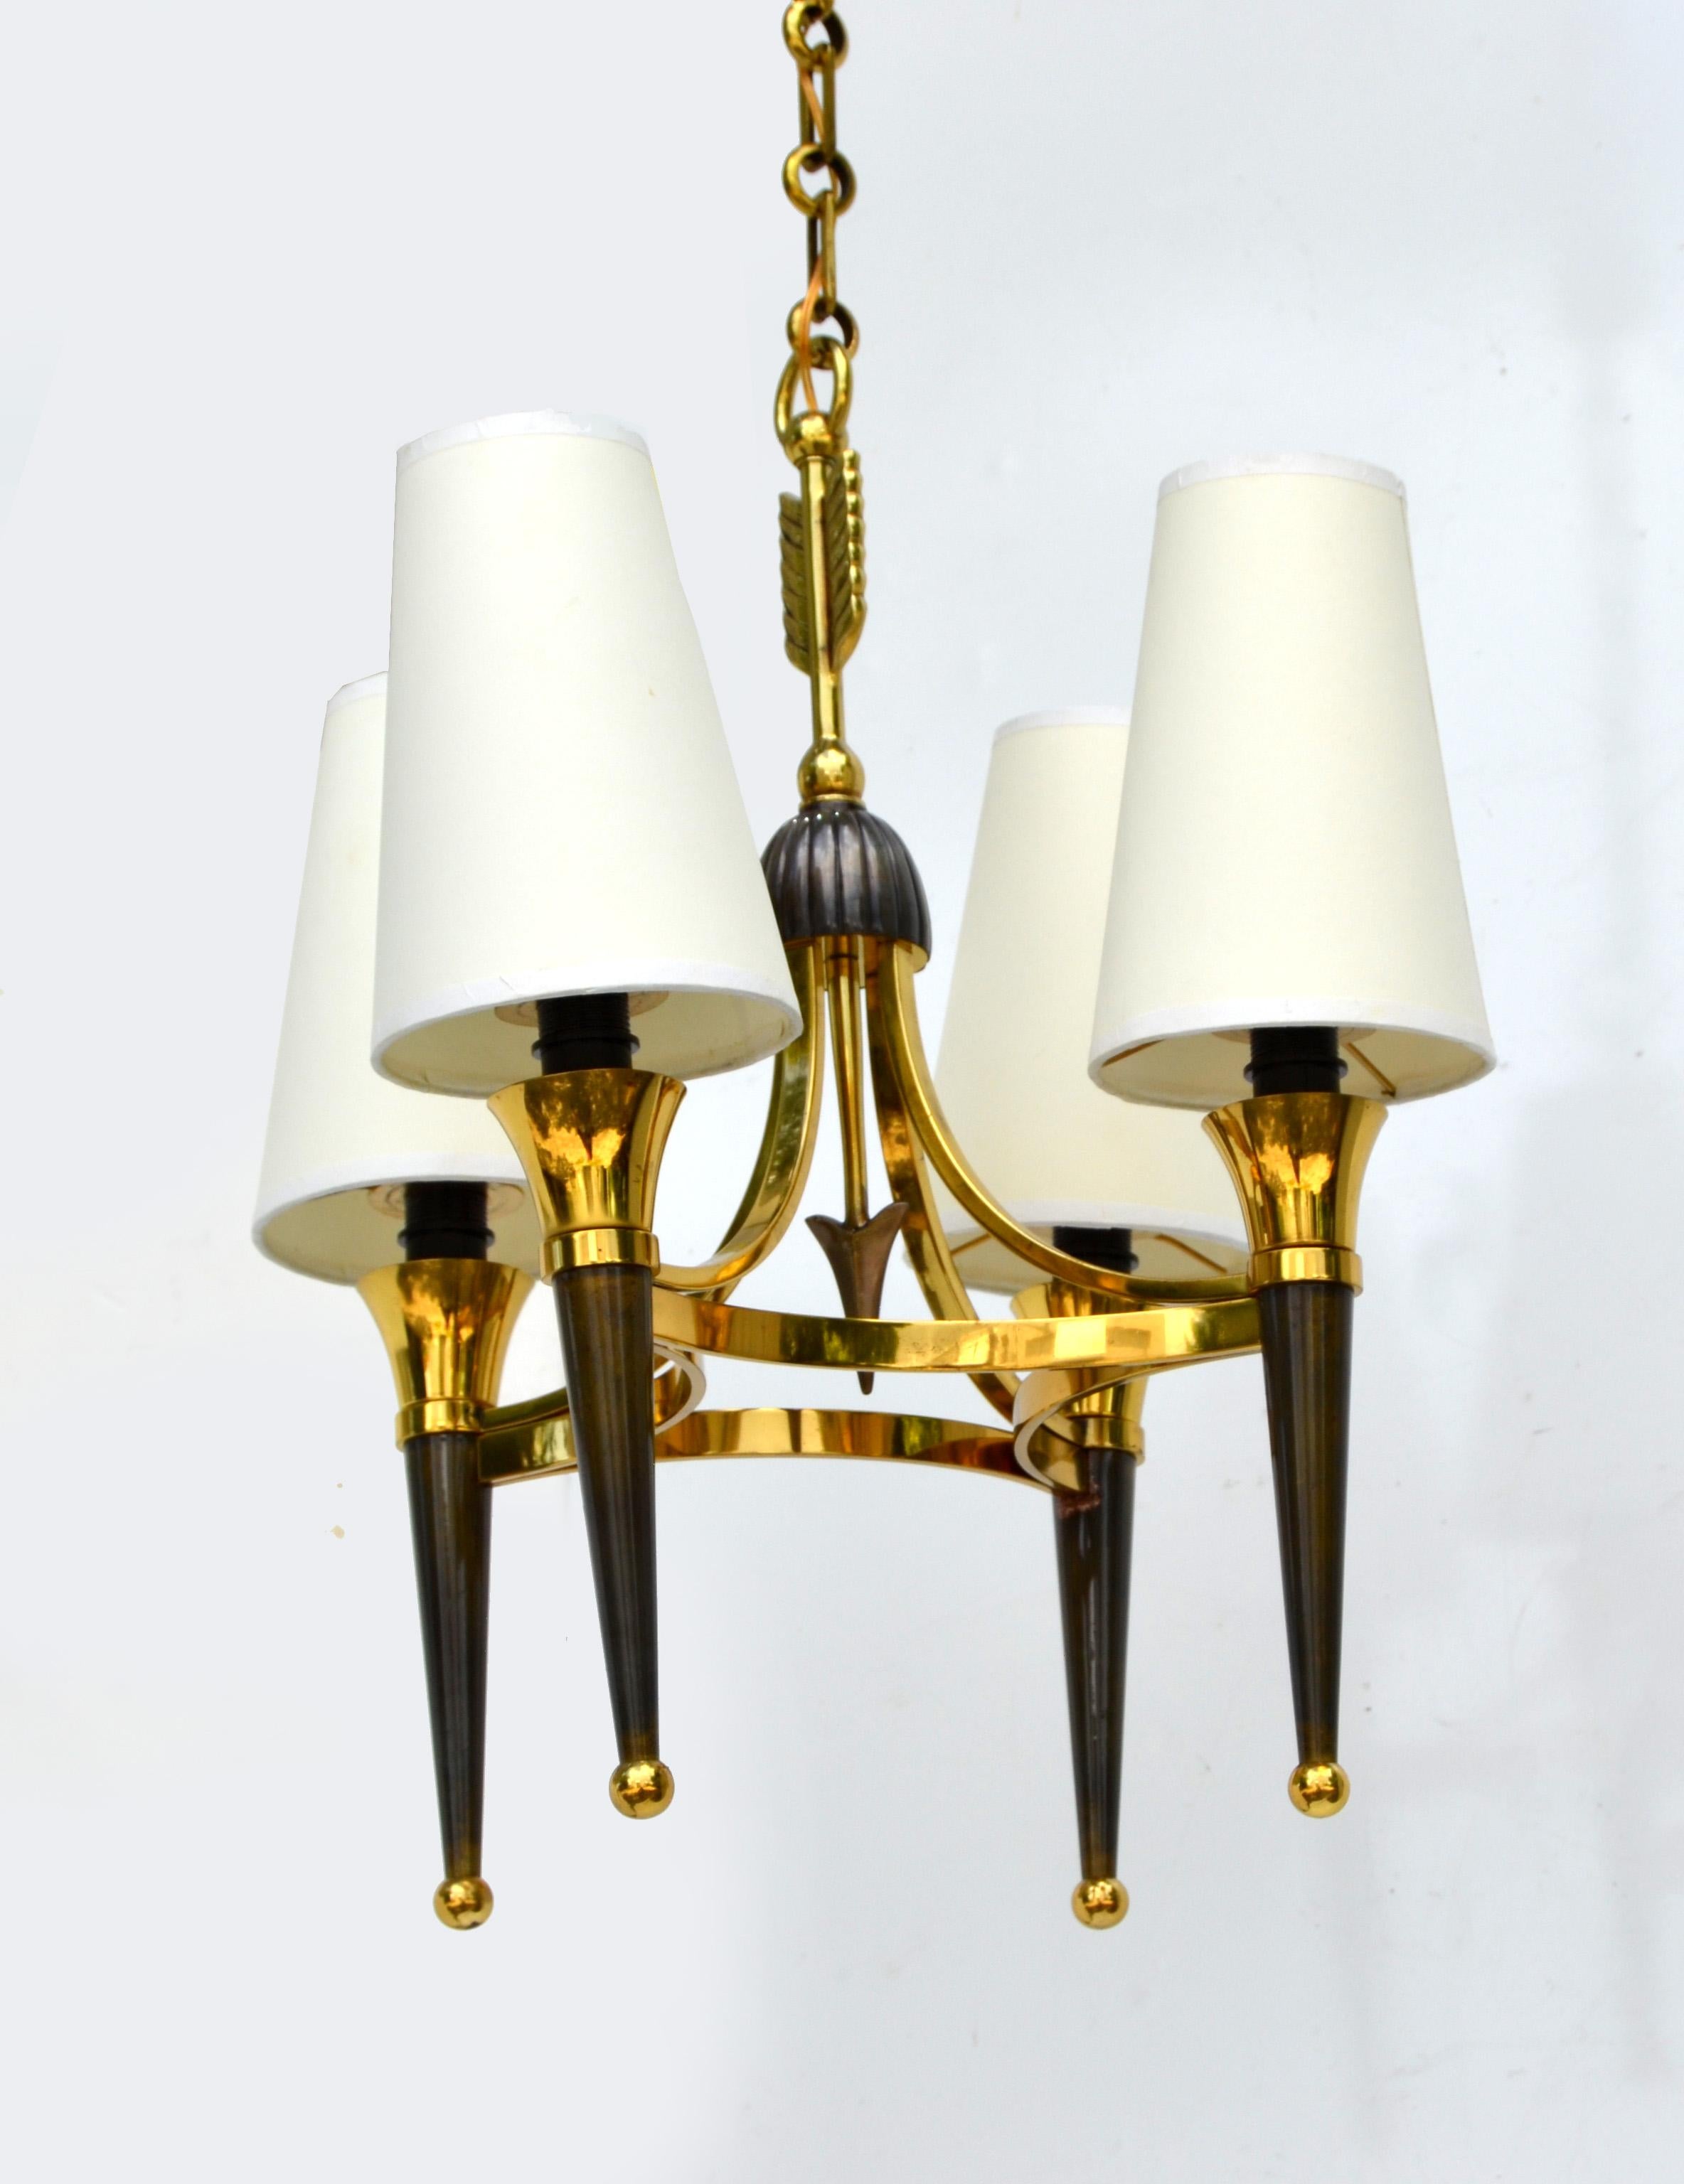 Superb Andre Arbus style 4-light chandelier Art Deco Period circa 1940.
Brass Arrow in the Center of the Chandelier and comes with 4 Cone Shaped Off White Paper Shades. 
Two patinas in brass and gun metal. US rewired and in working condition 4